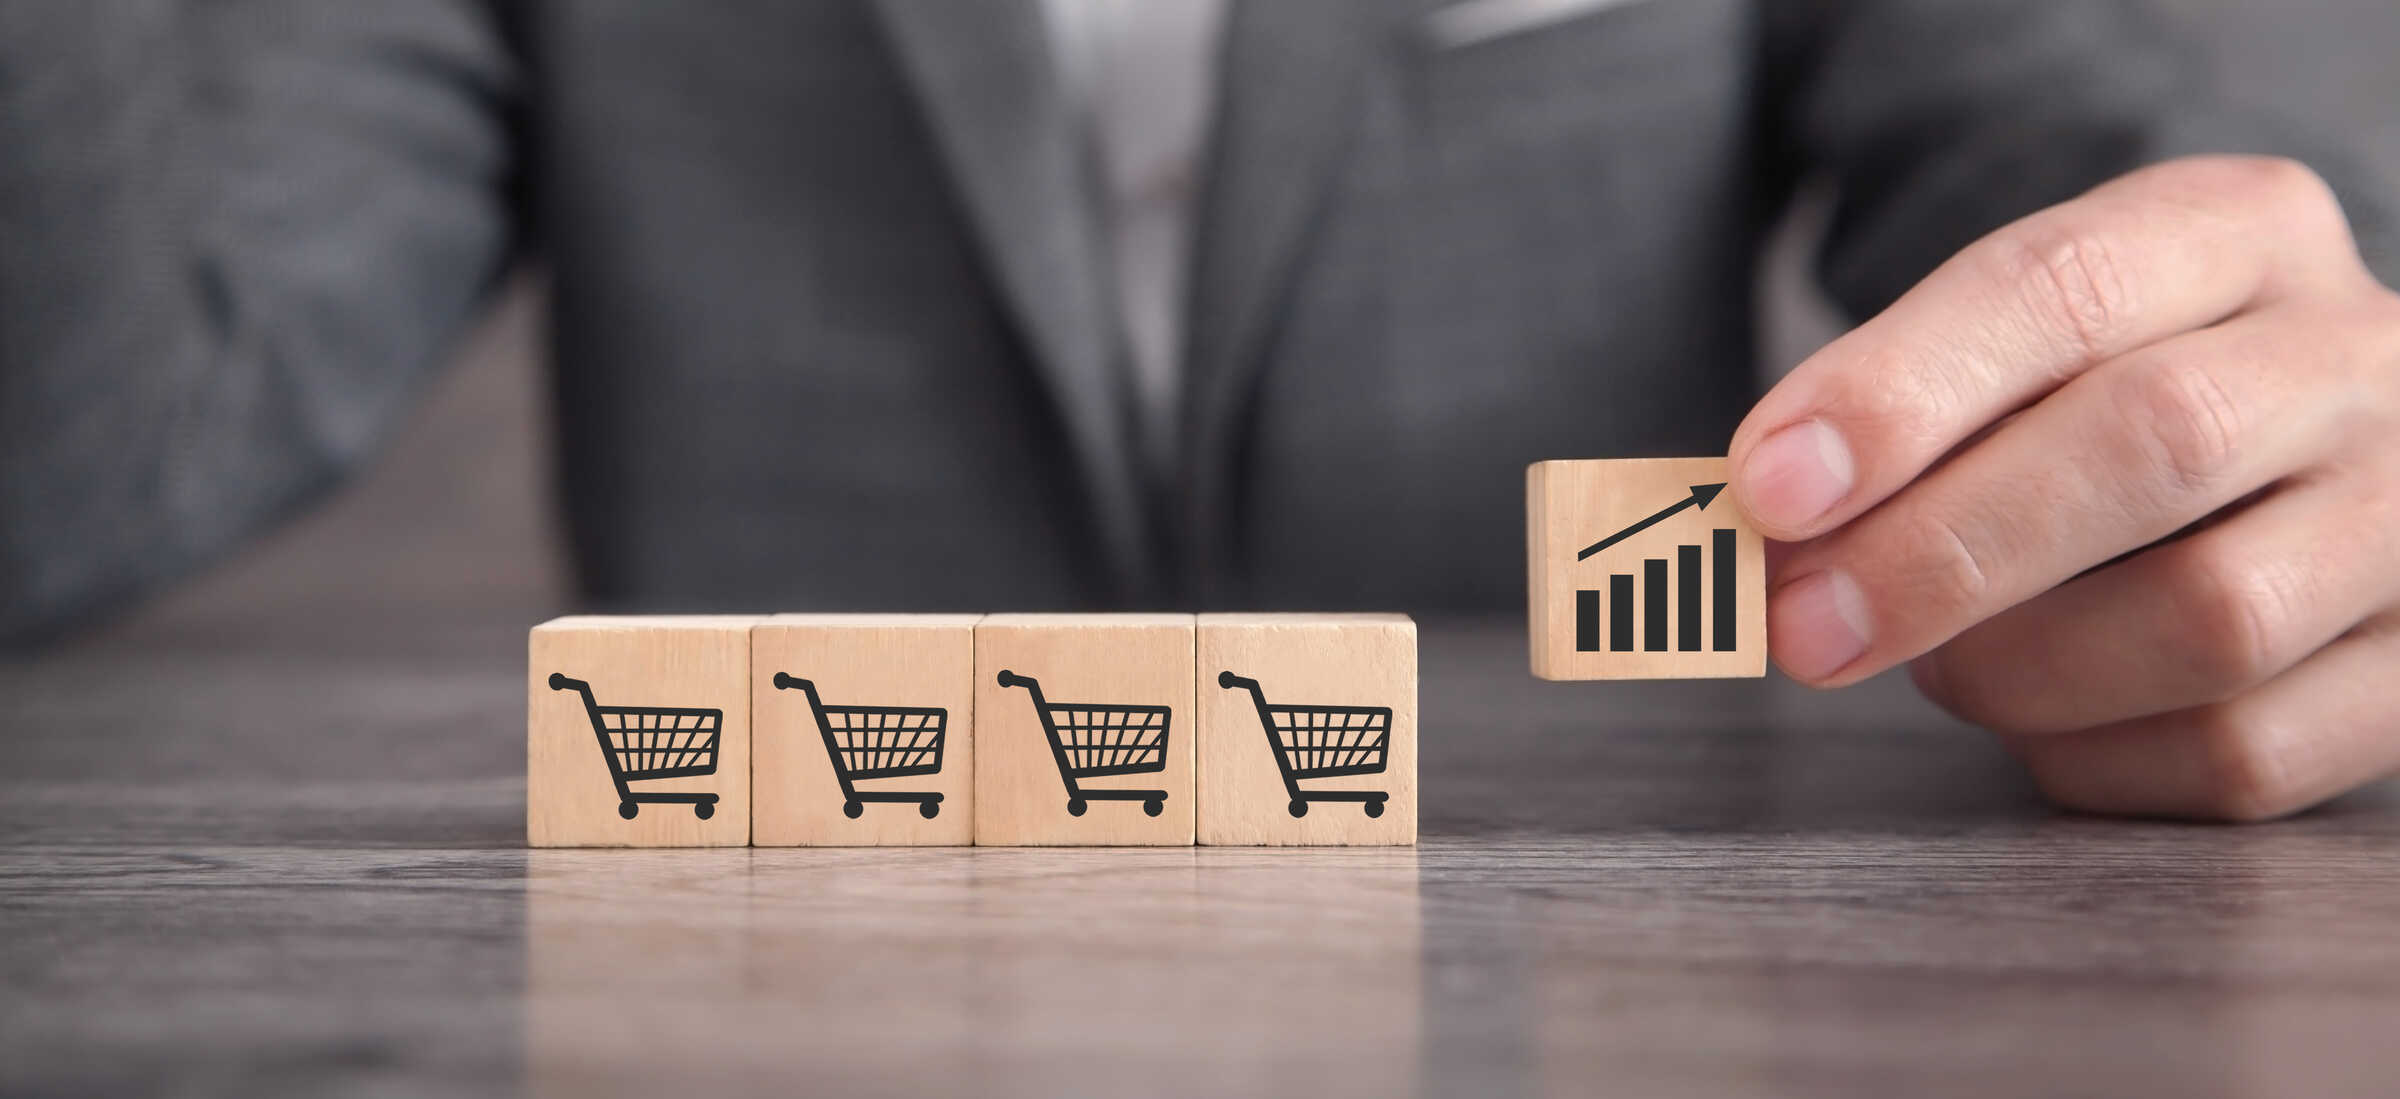 Revenue Growth Management in CPG: Game Changing Factors